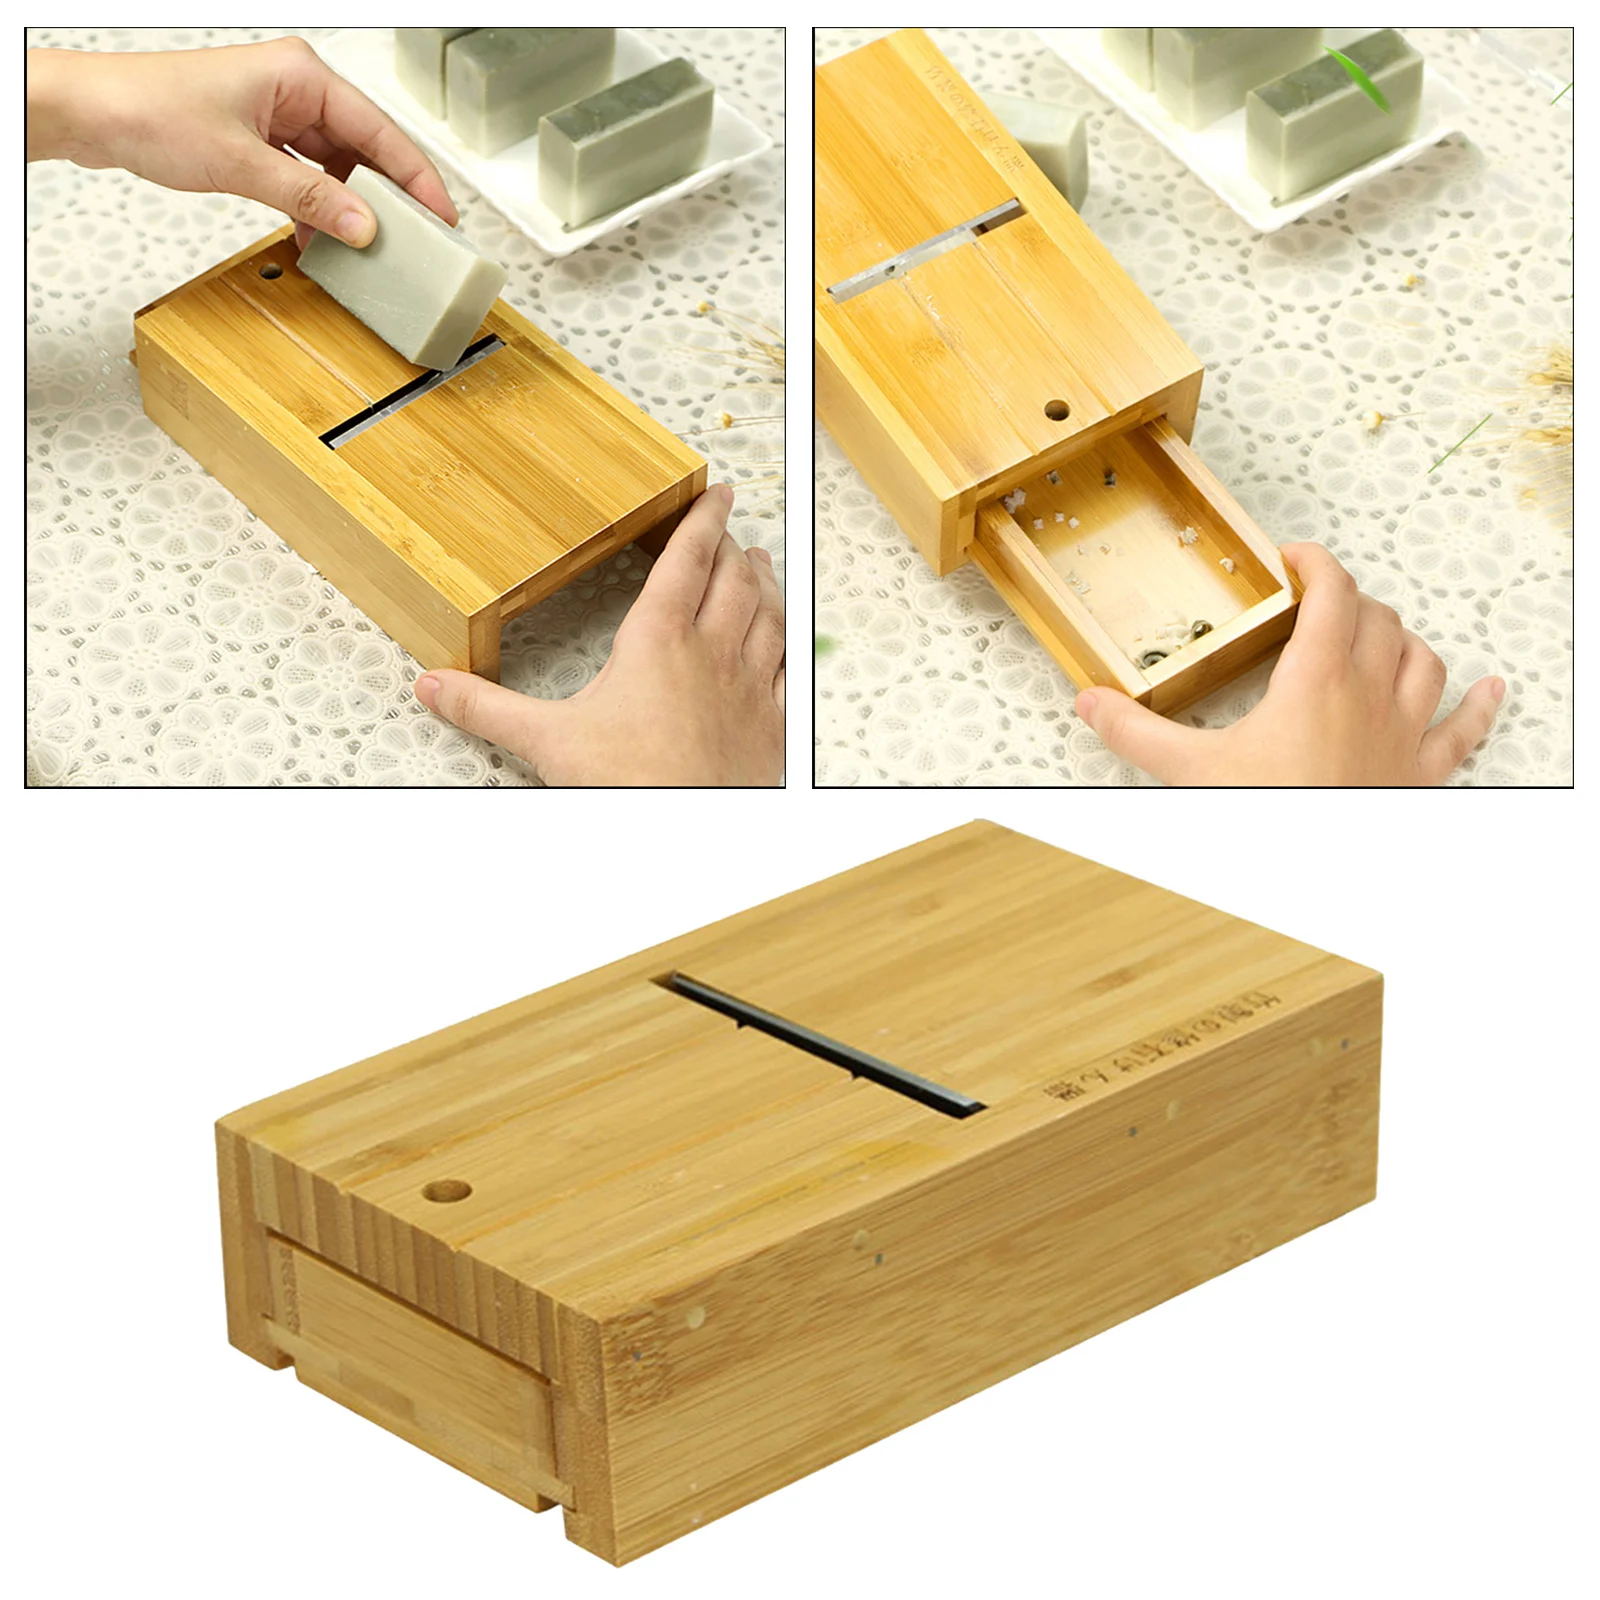 Wood Box Soap Loaf Cutter Beveler Planer for Trimming DIY Candle Supplies